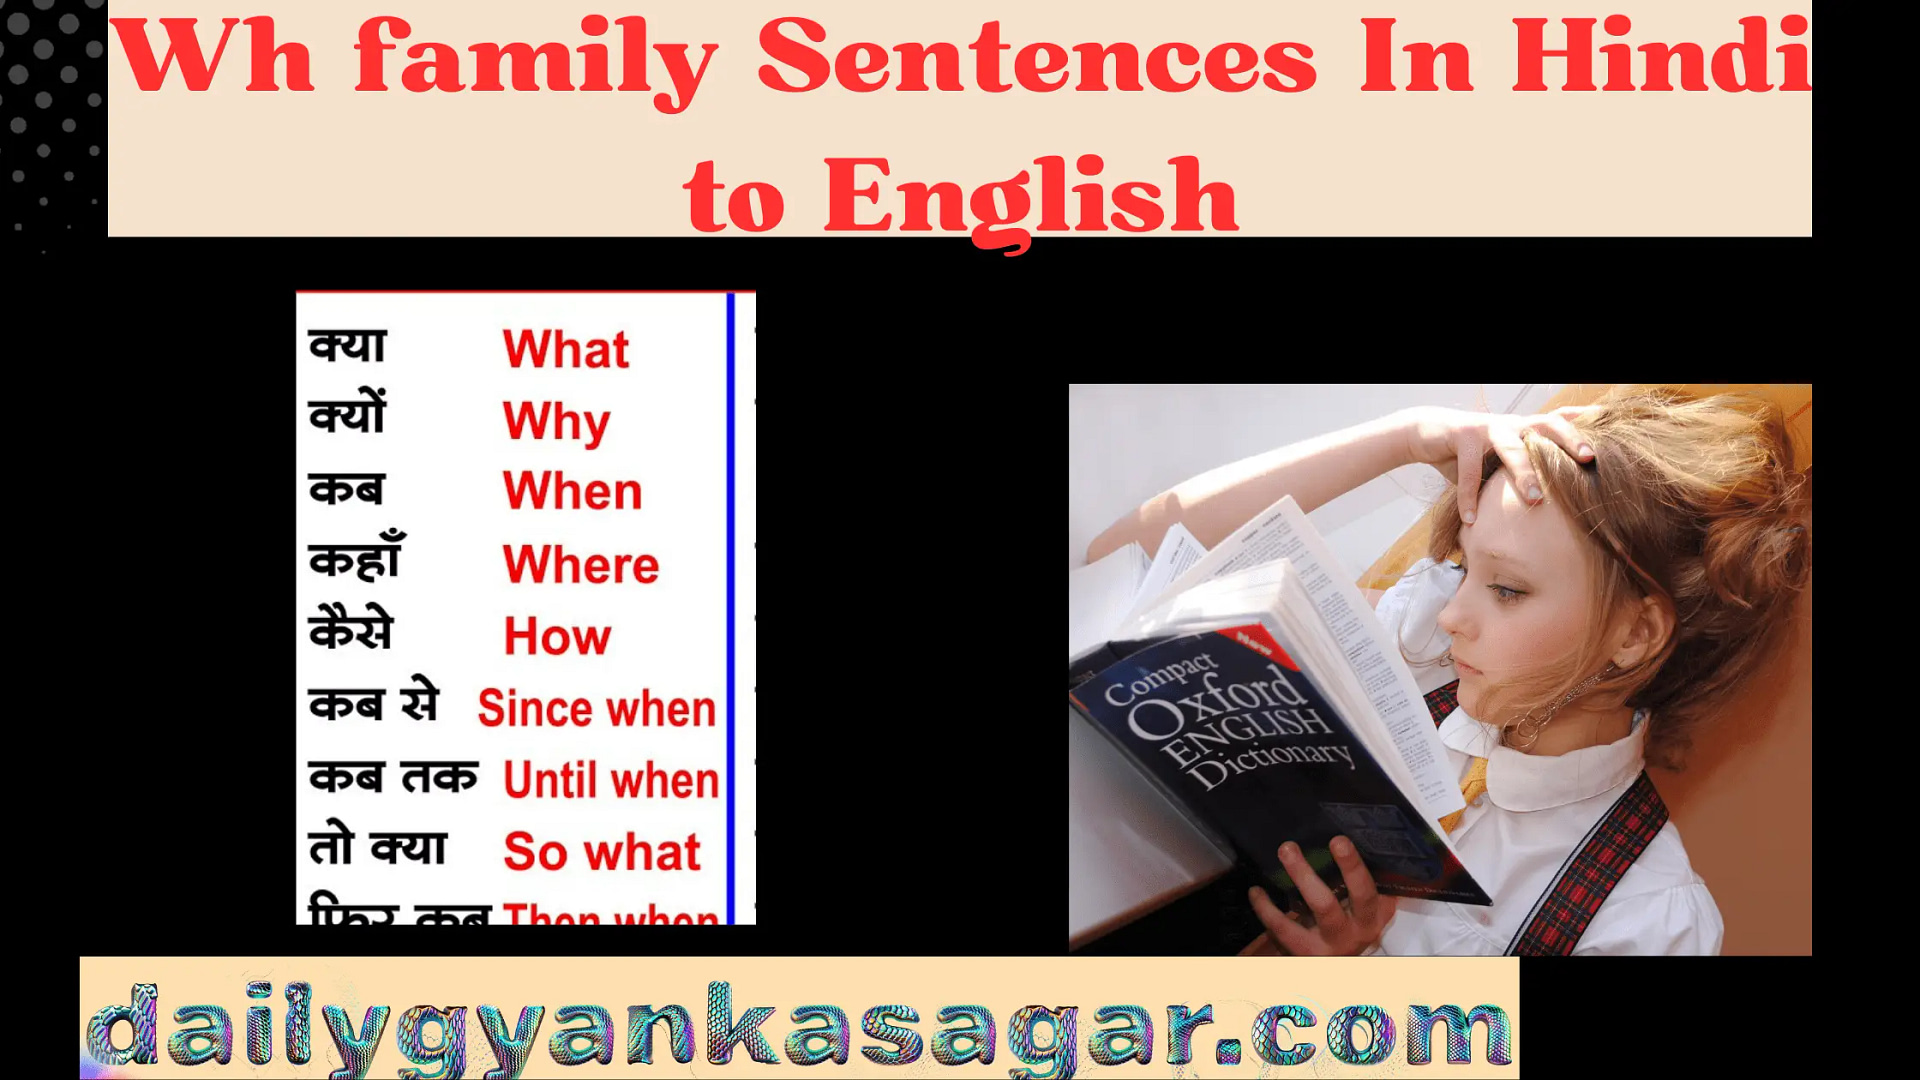 Wh family Sentences In Hindi to English